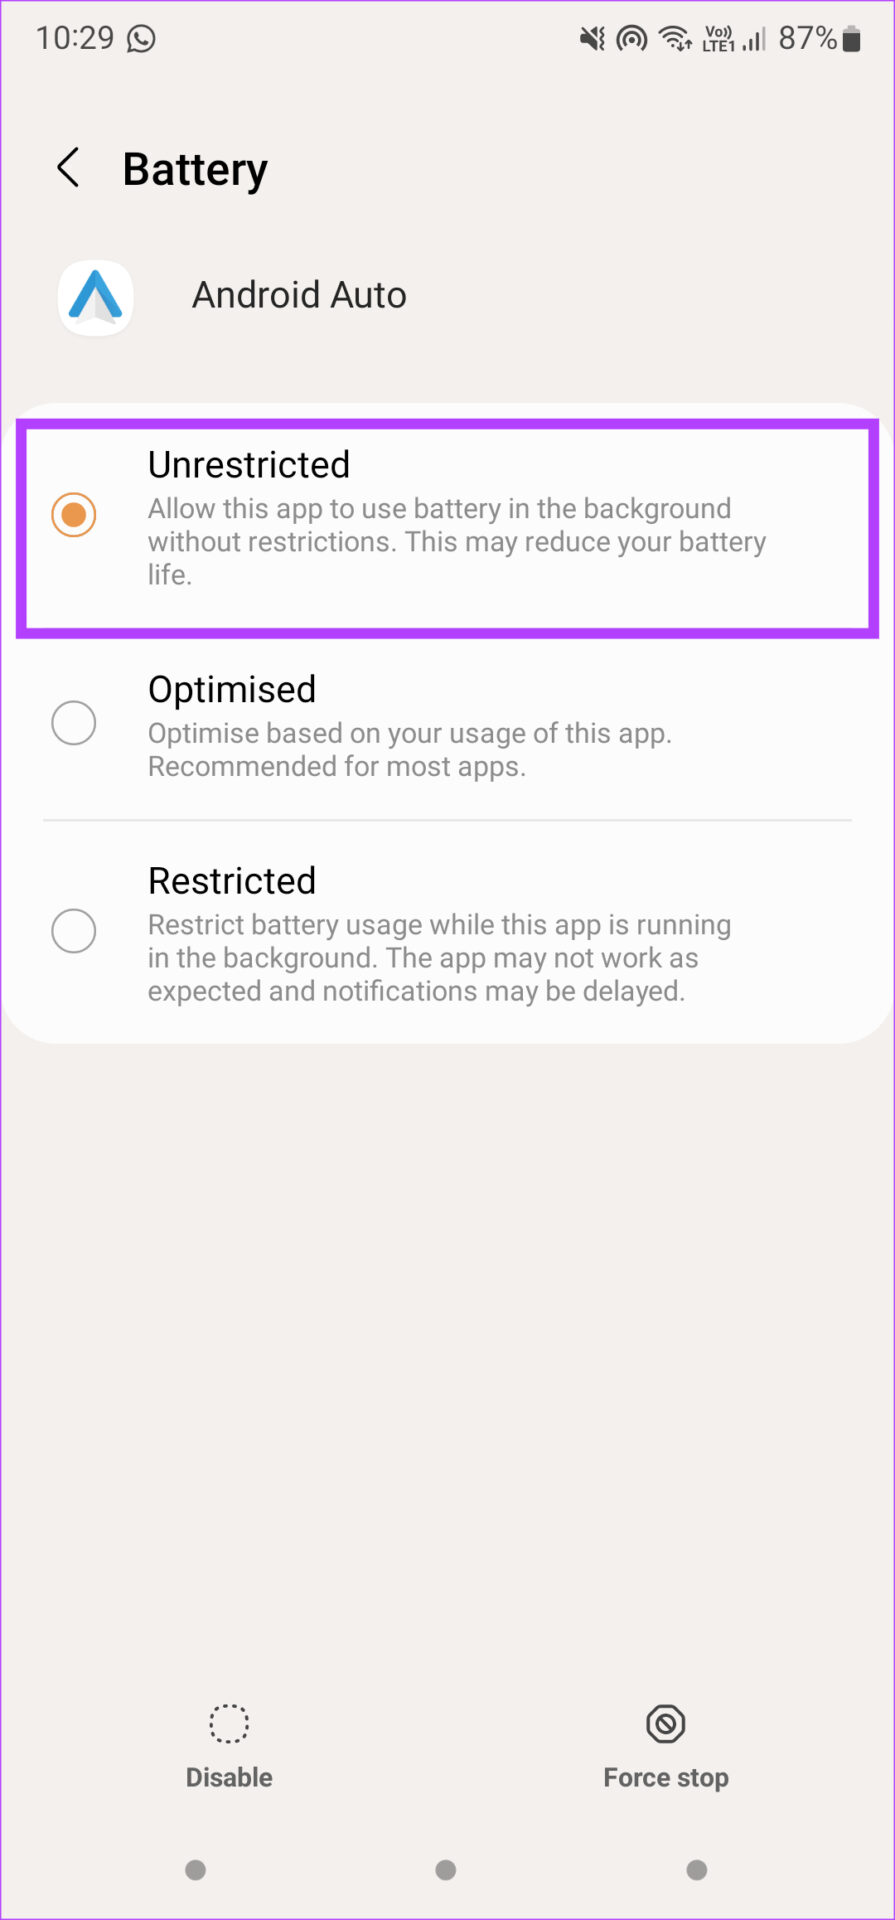 Unrestricted battery